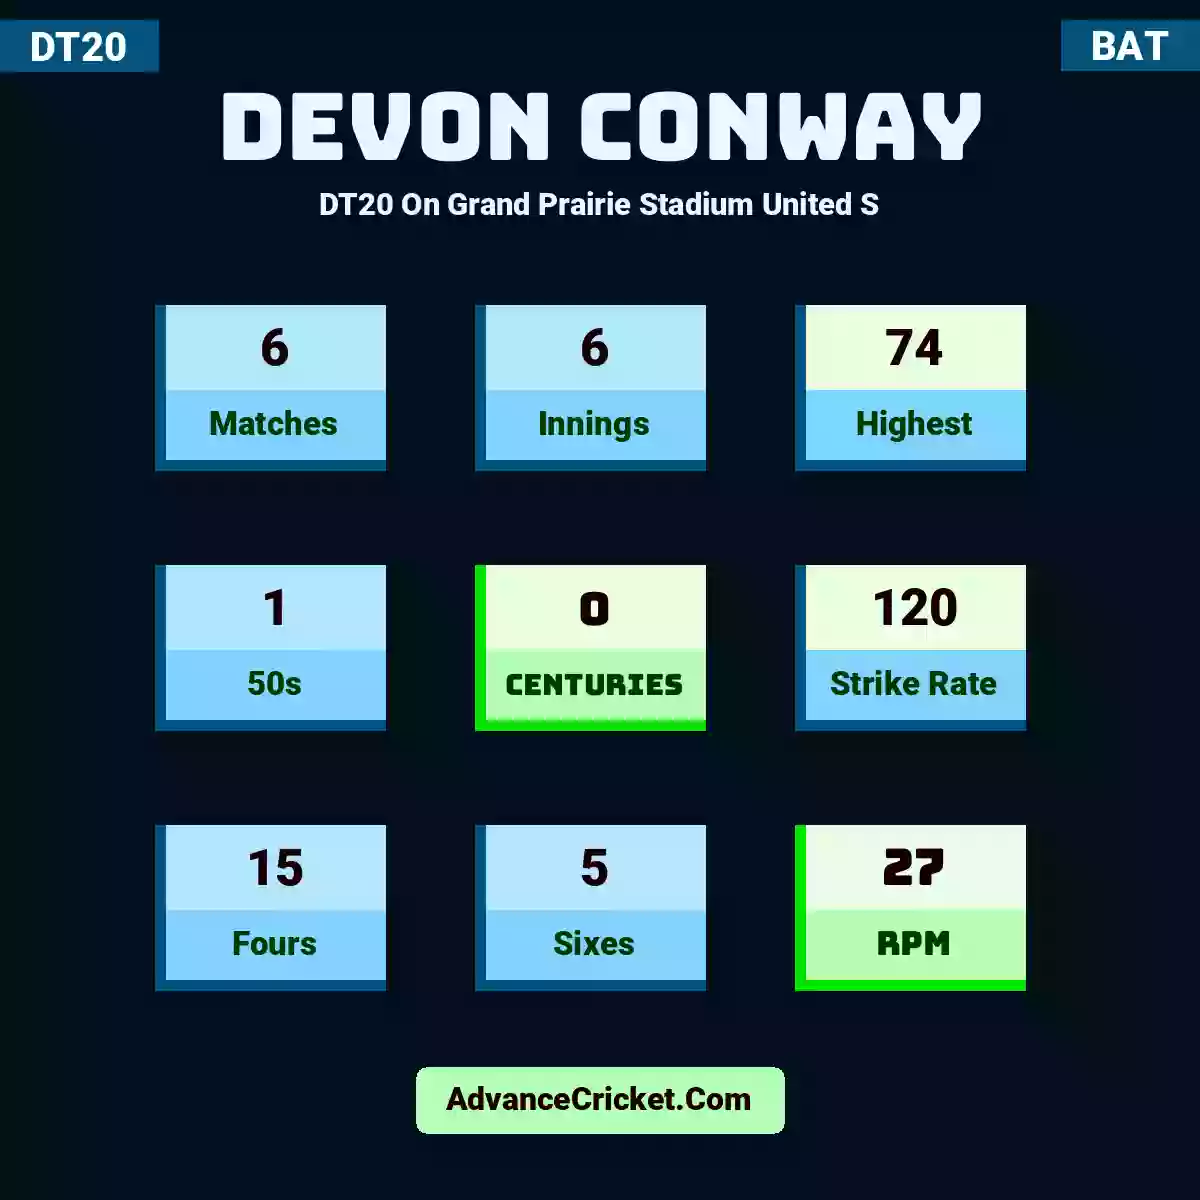 Devon Conway DT20  On Grand Prairie Stadium United S, Devon Conway played 6 matches, scored 74 runs as highest, 1 half-centuries, and 0 centuries, with a strike rate of 120. D.Conway hit 15 fours and 5 sixes, with an RPM of 27.